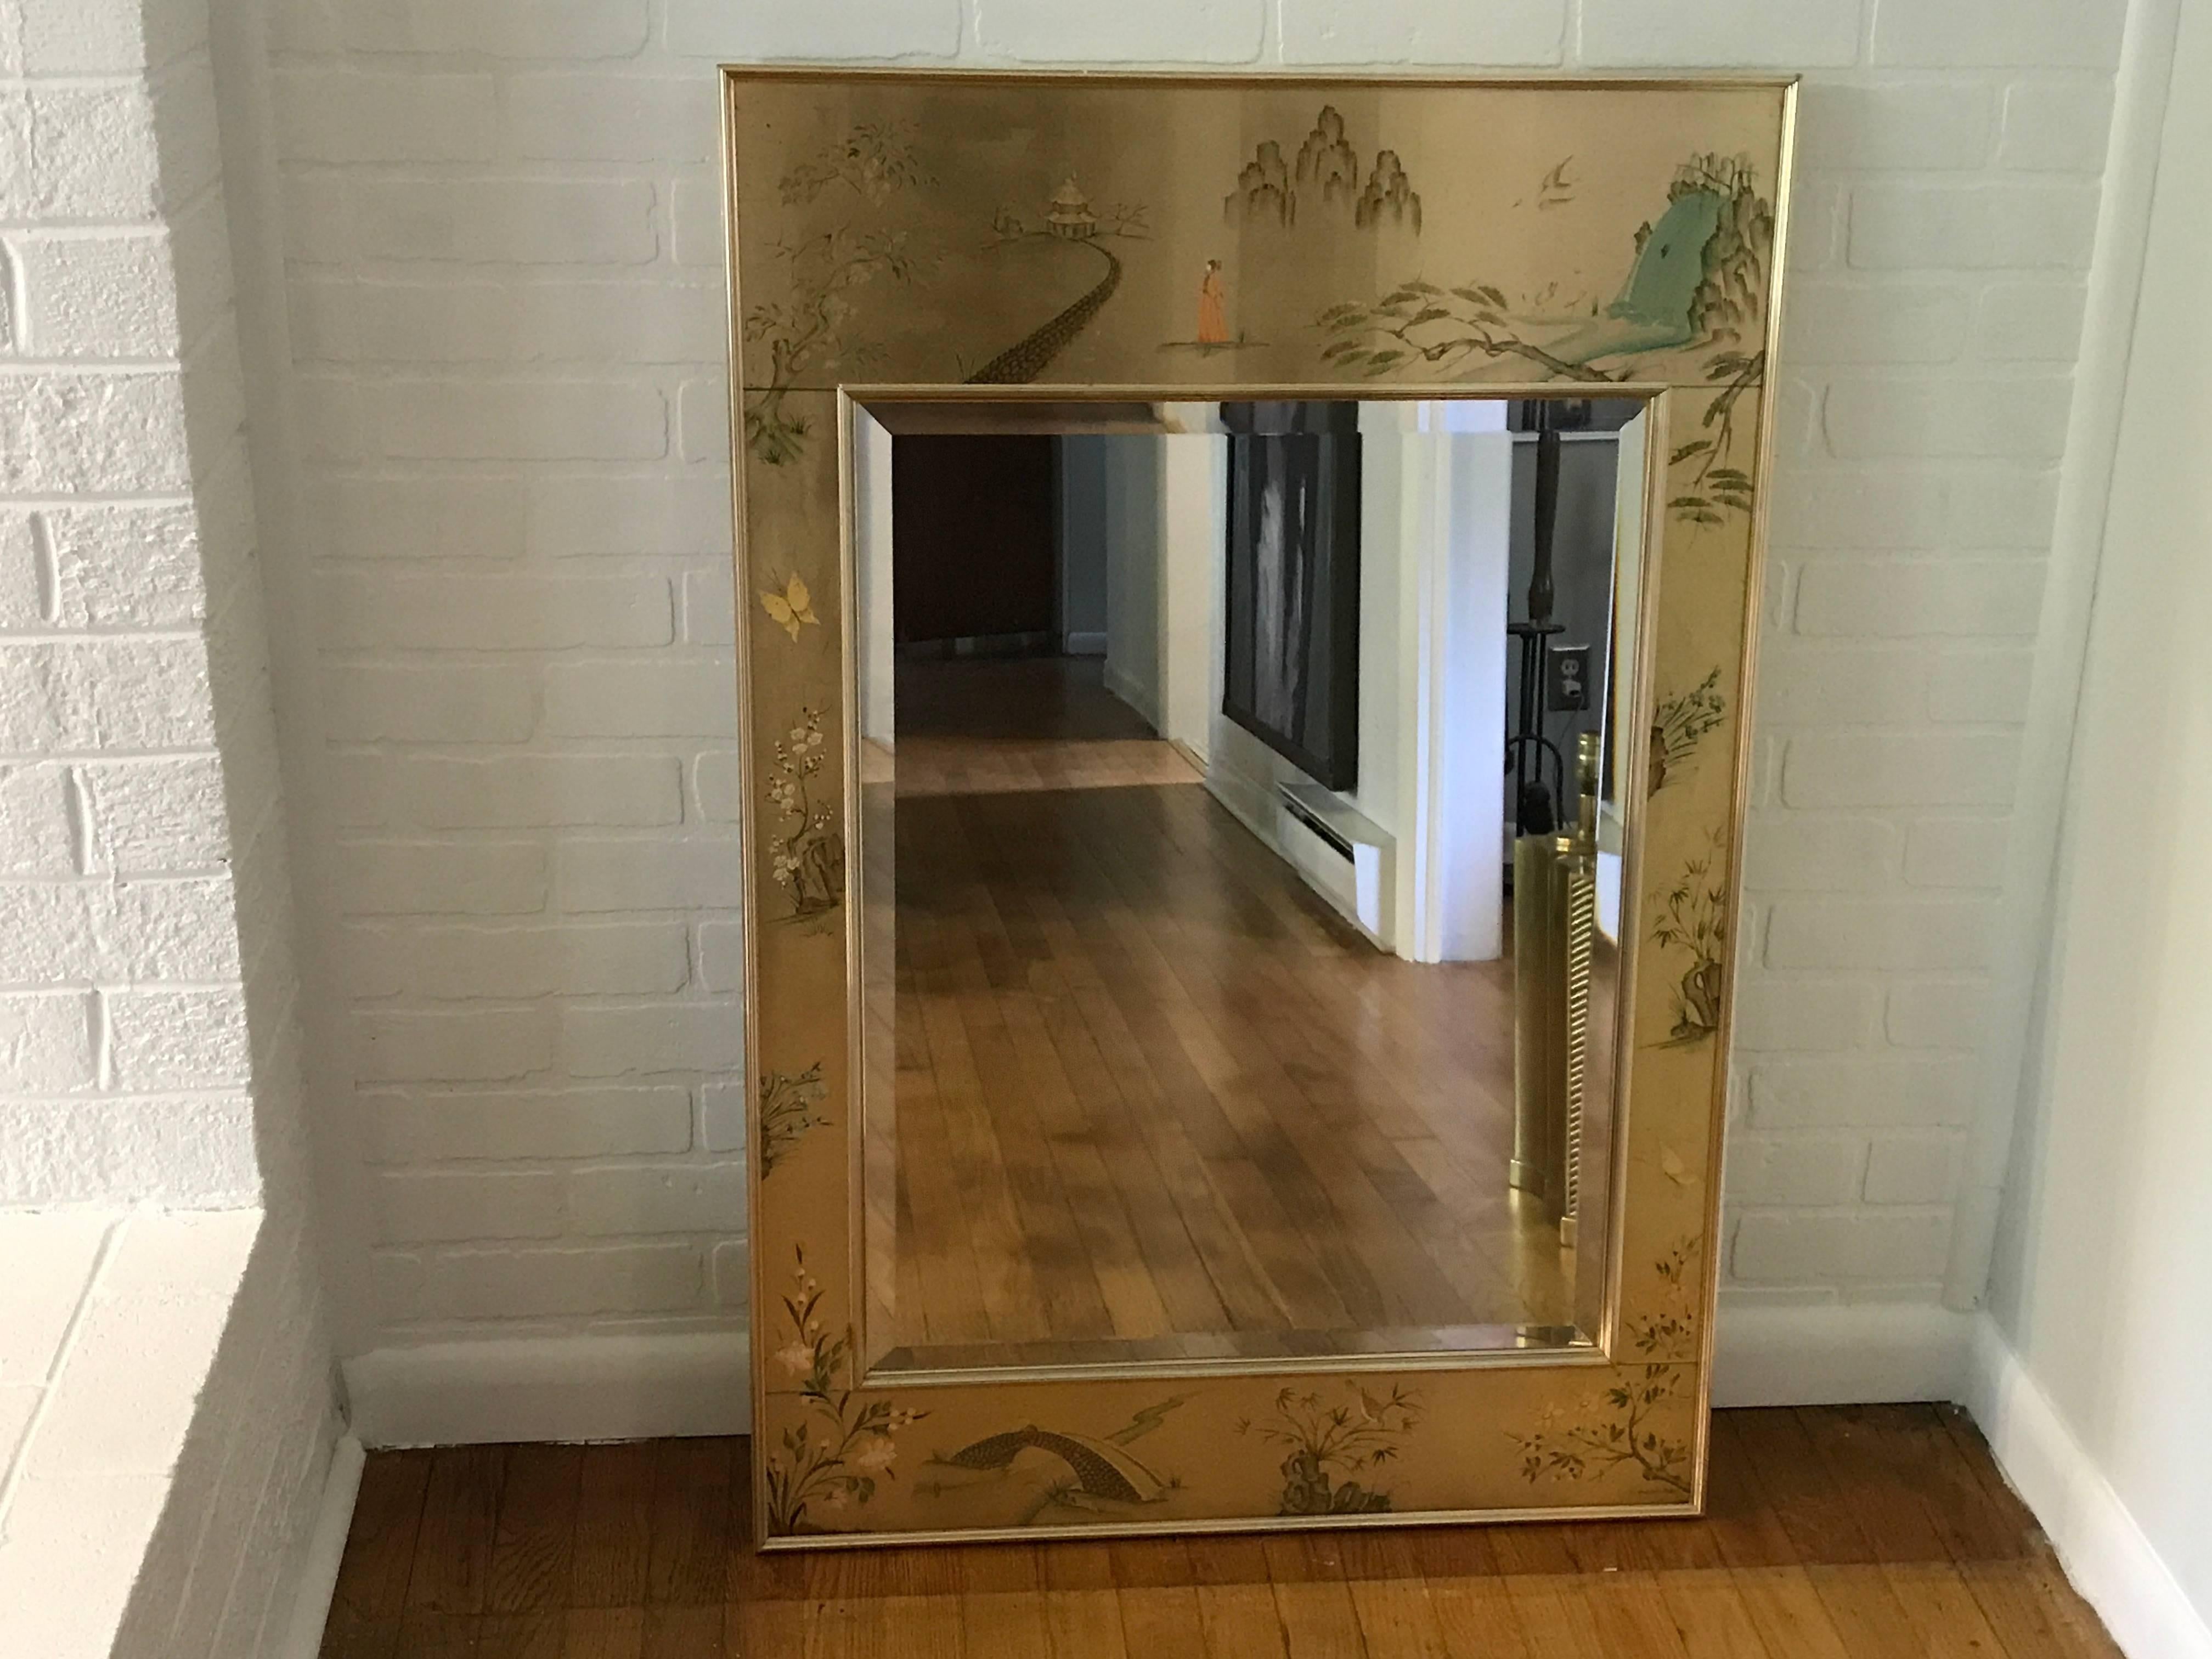 Offered is a stunning, pair of 1980s La Barge gold chinoiserie mirrors with a thick brass colored steel framing.